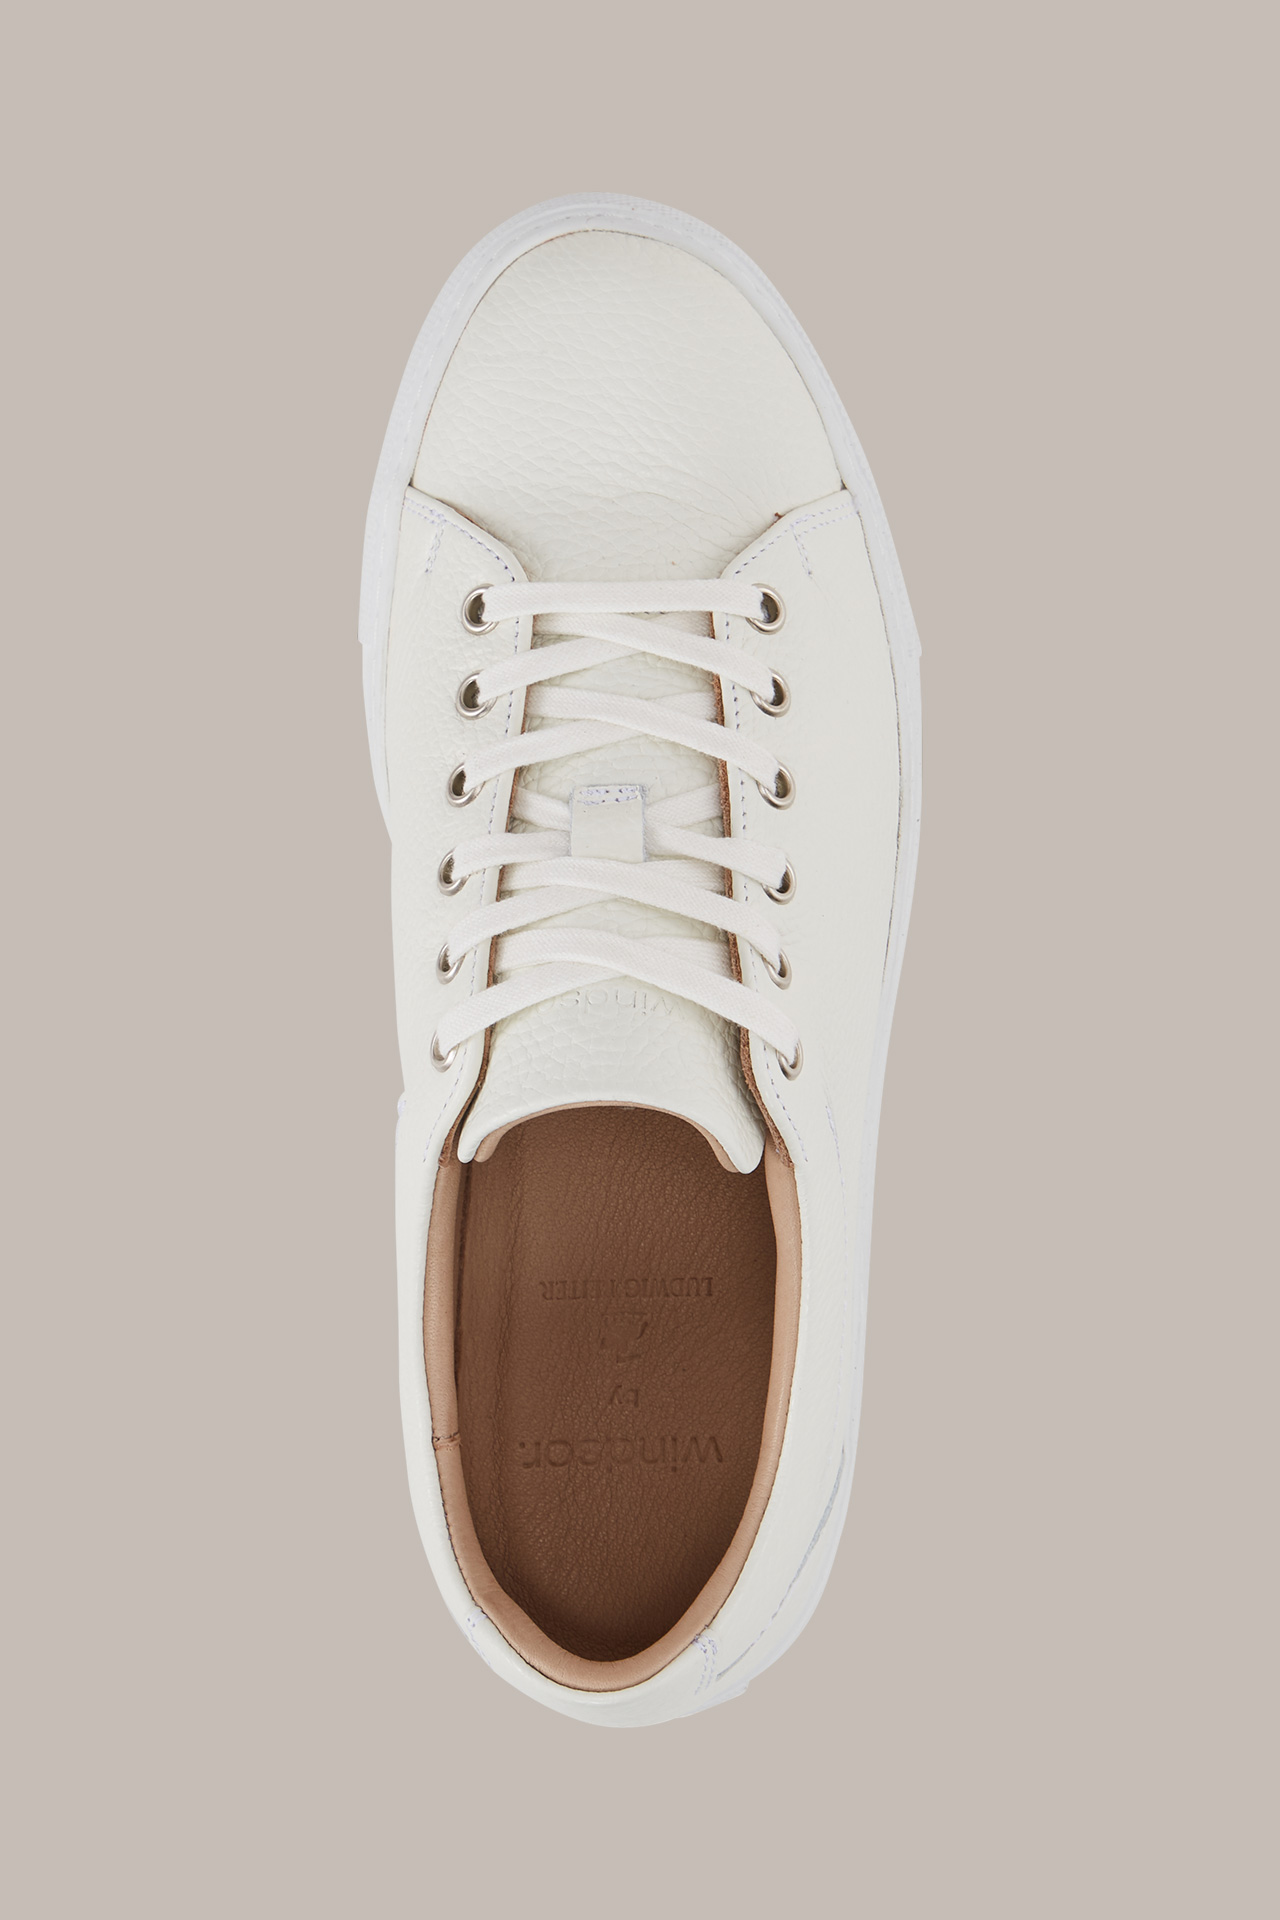 Unisex Sneaker by Ludwig Reiter in White